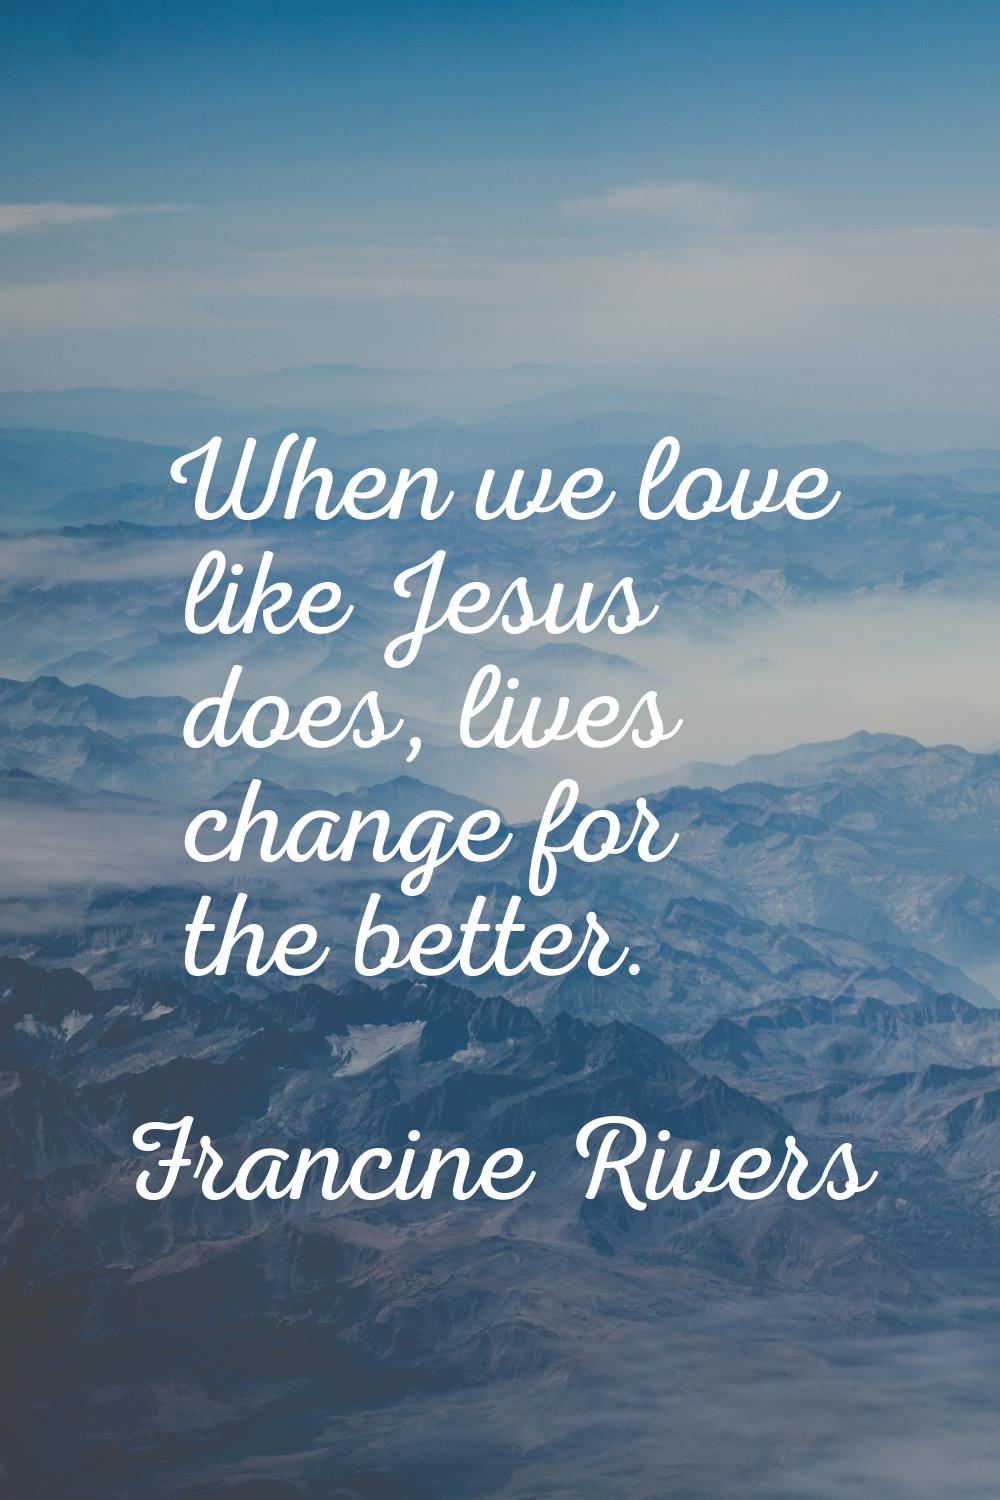 When we love like Jesus does, lives change for the better.